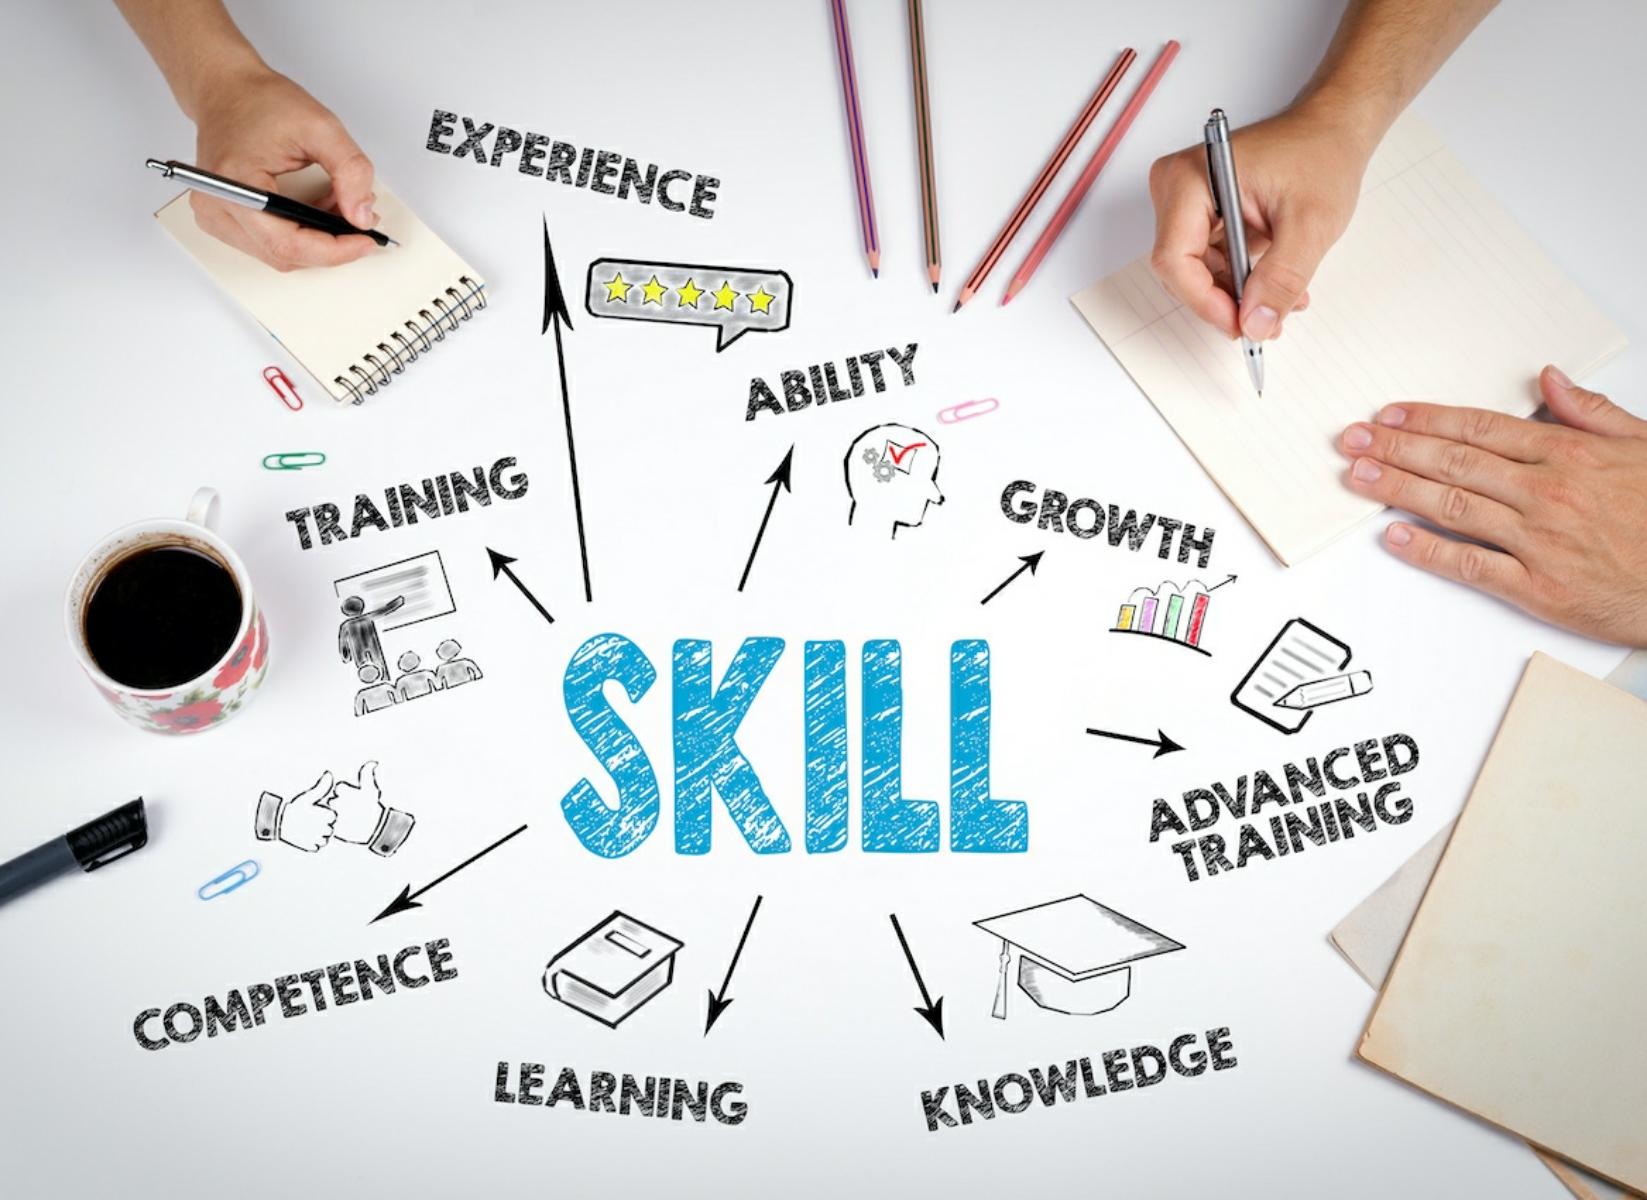 6. Learn New Skills And Improve Upon Your Existing Ones